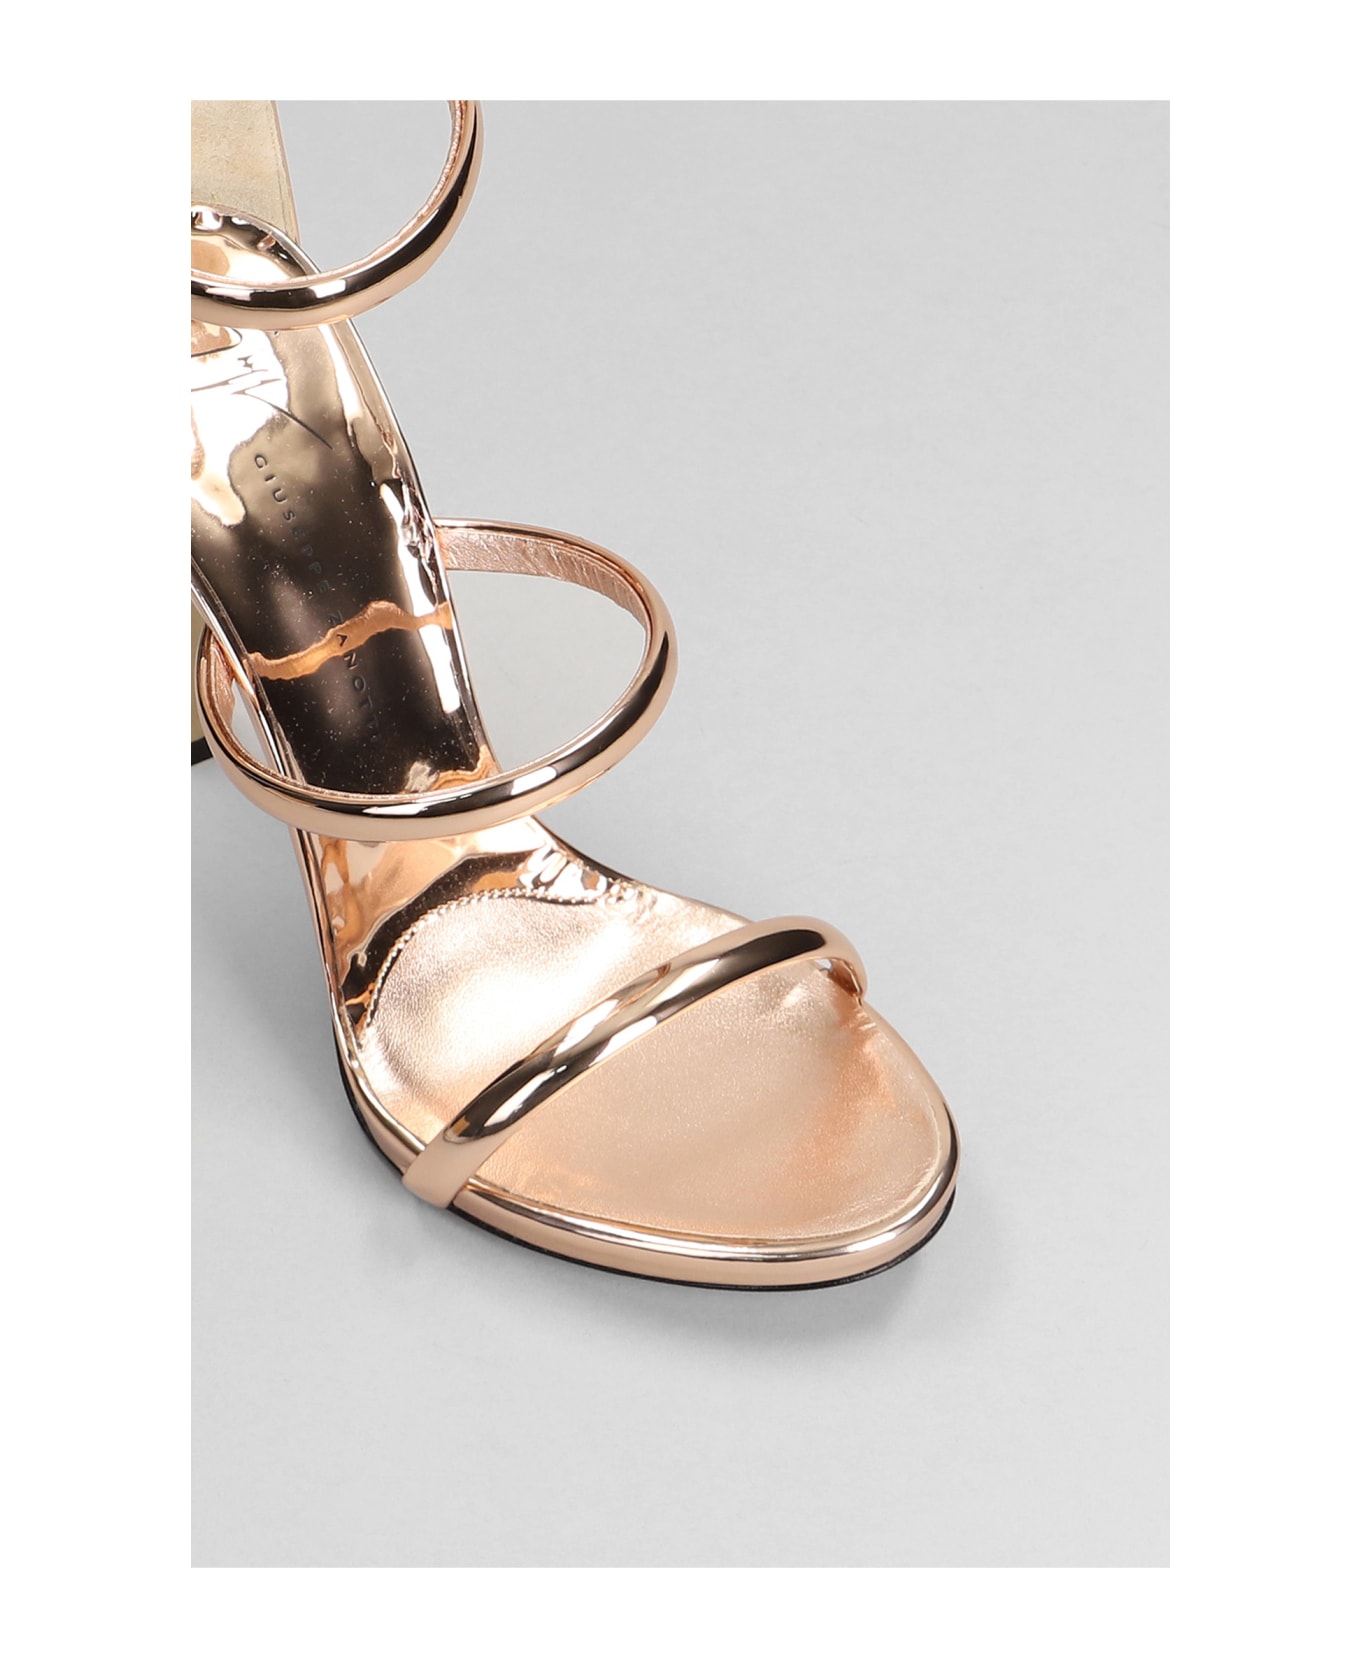 Giuseppe Zanotti Harmony Sandals In Gold Patent Leather - gold